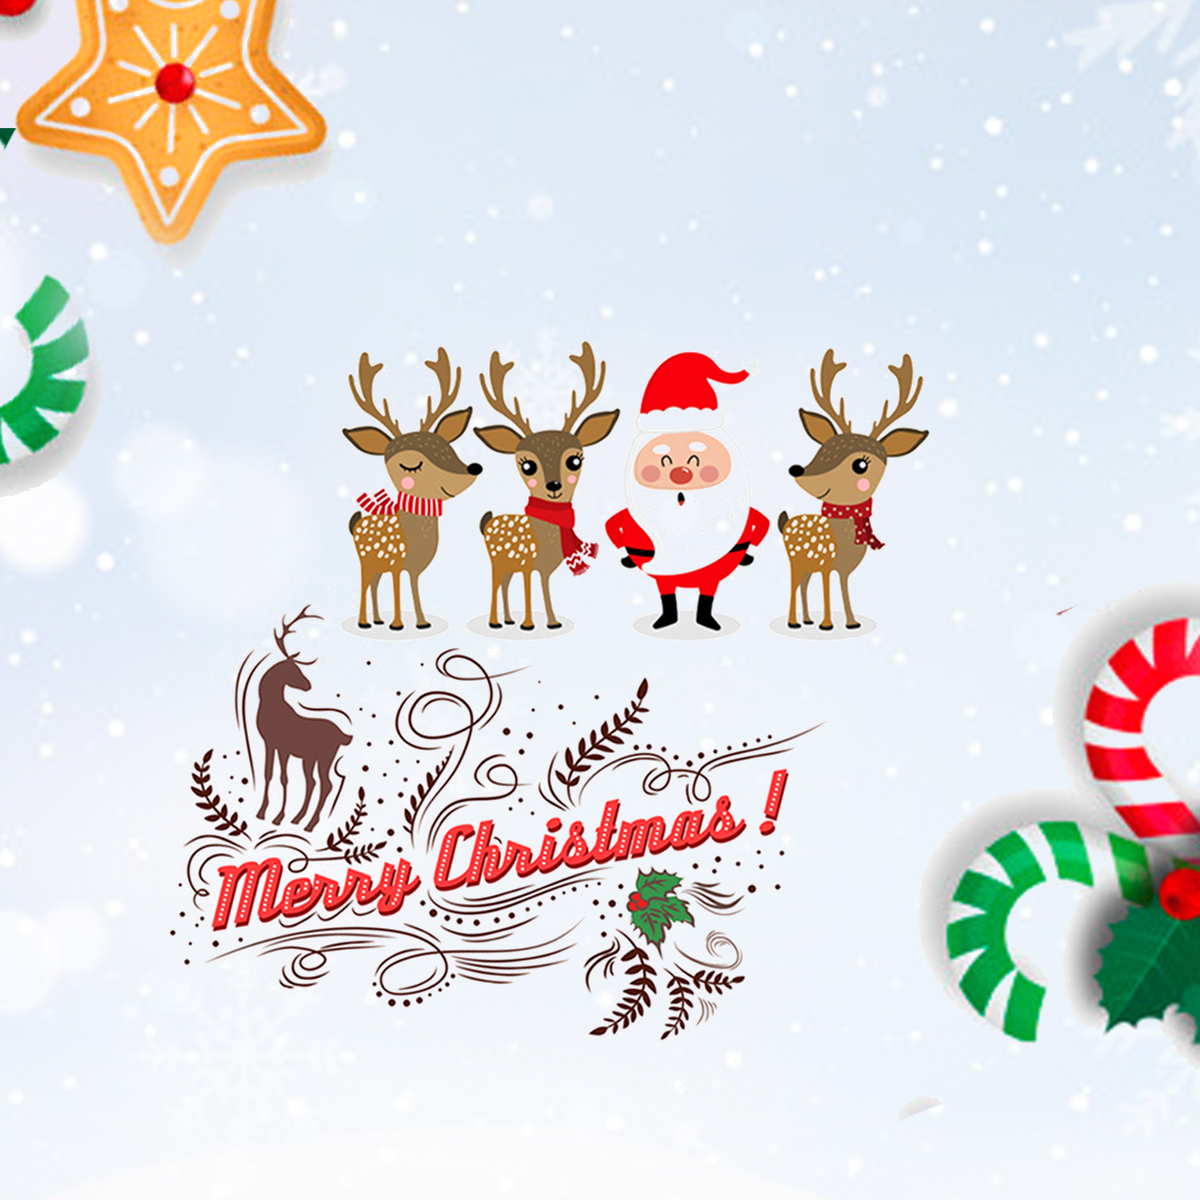 Santa with Reindeers, Merry Christmas Background Free Psd